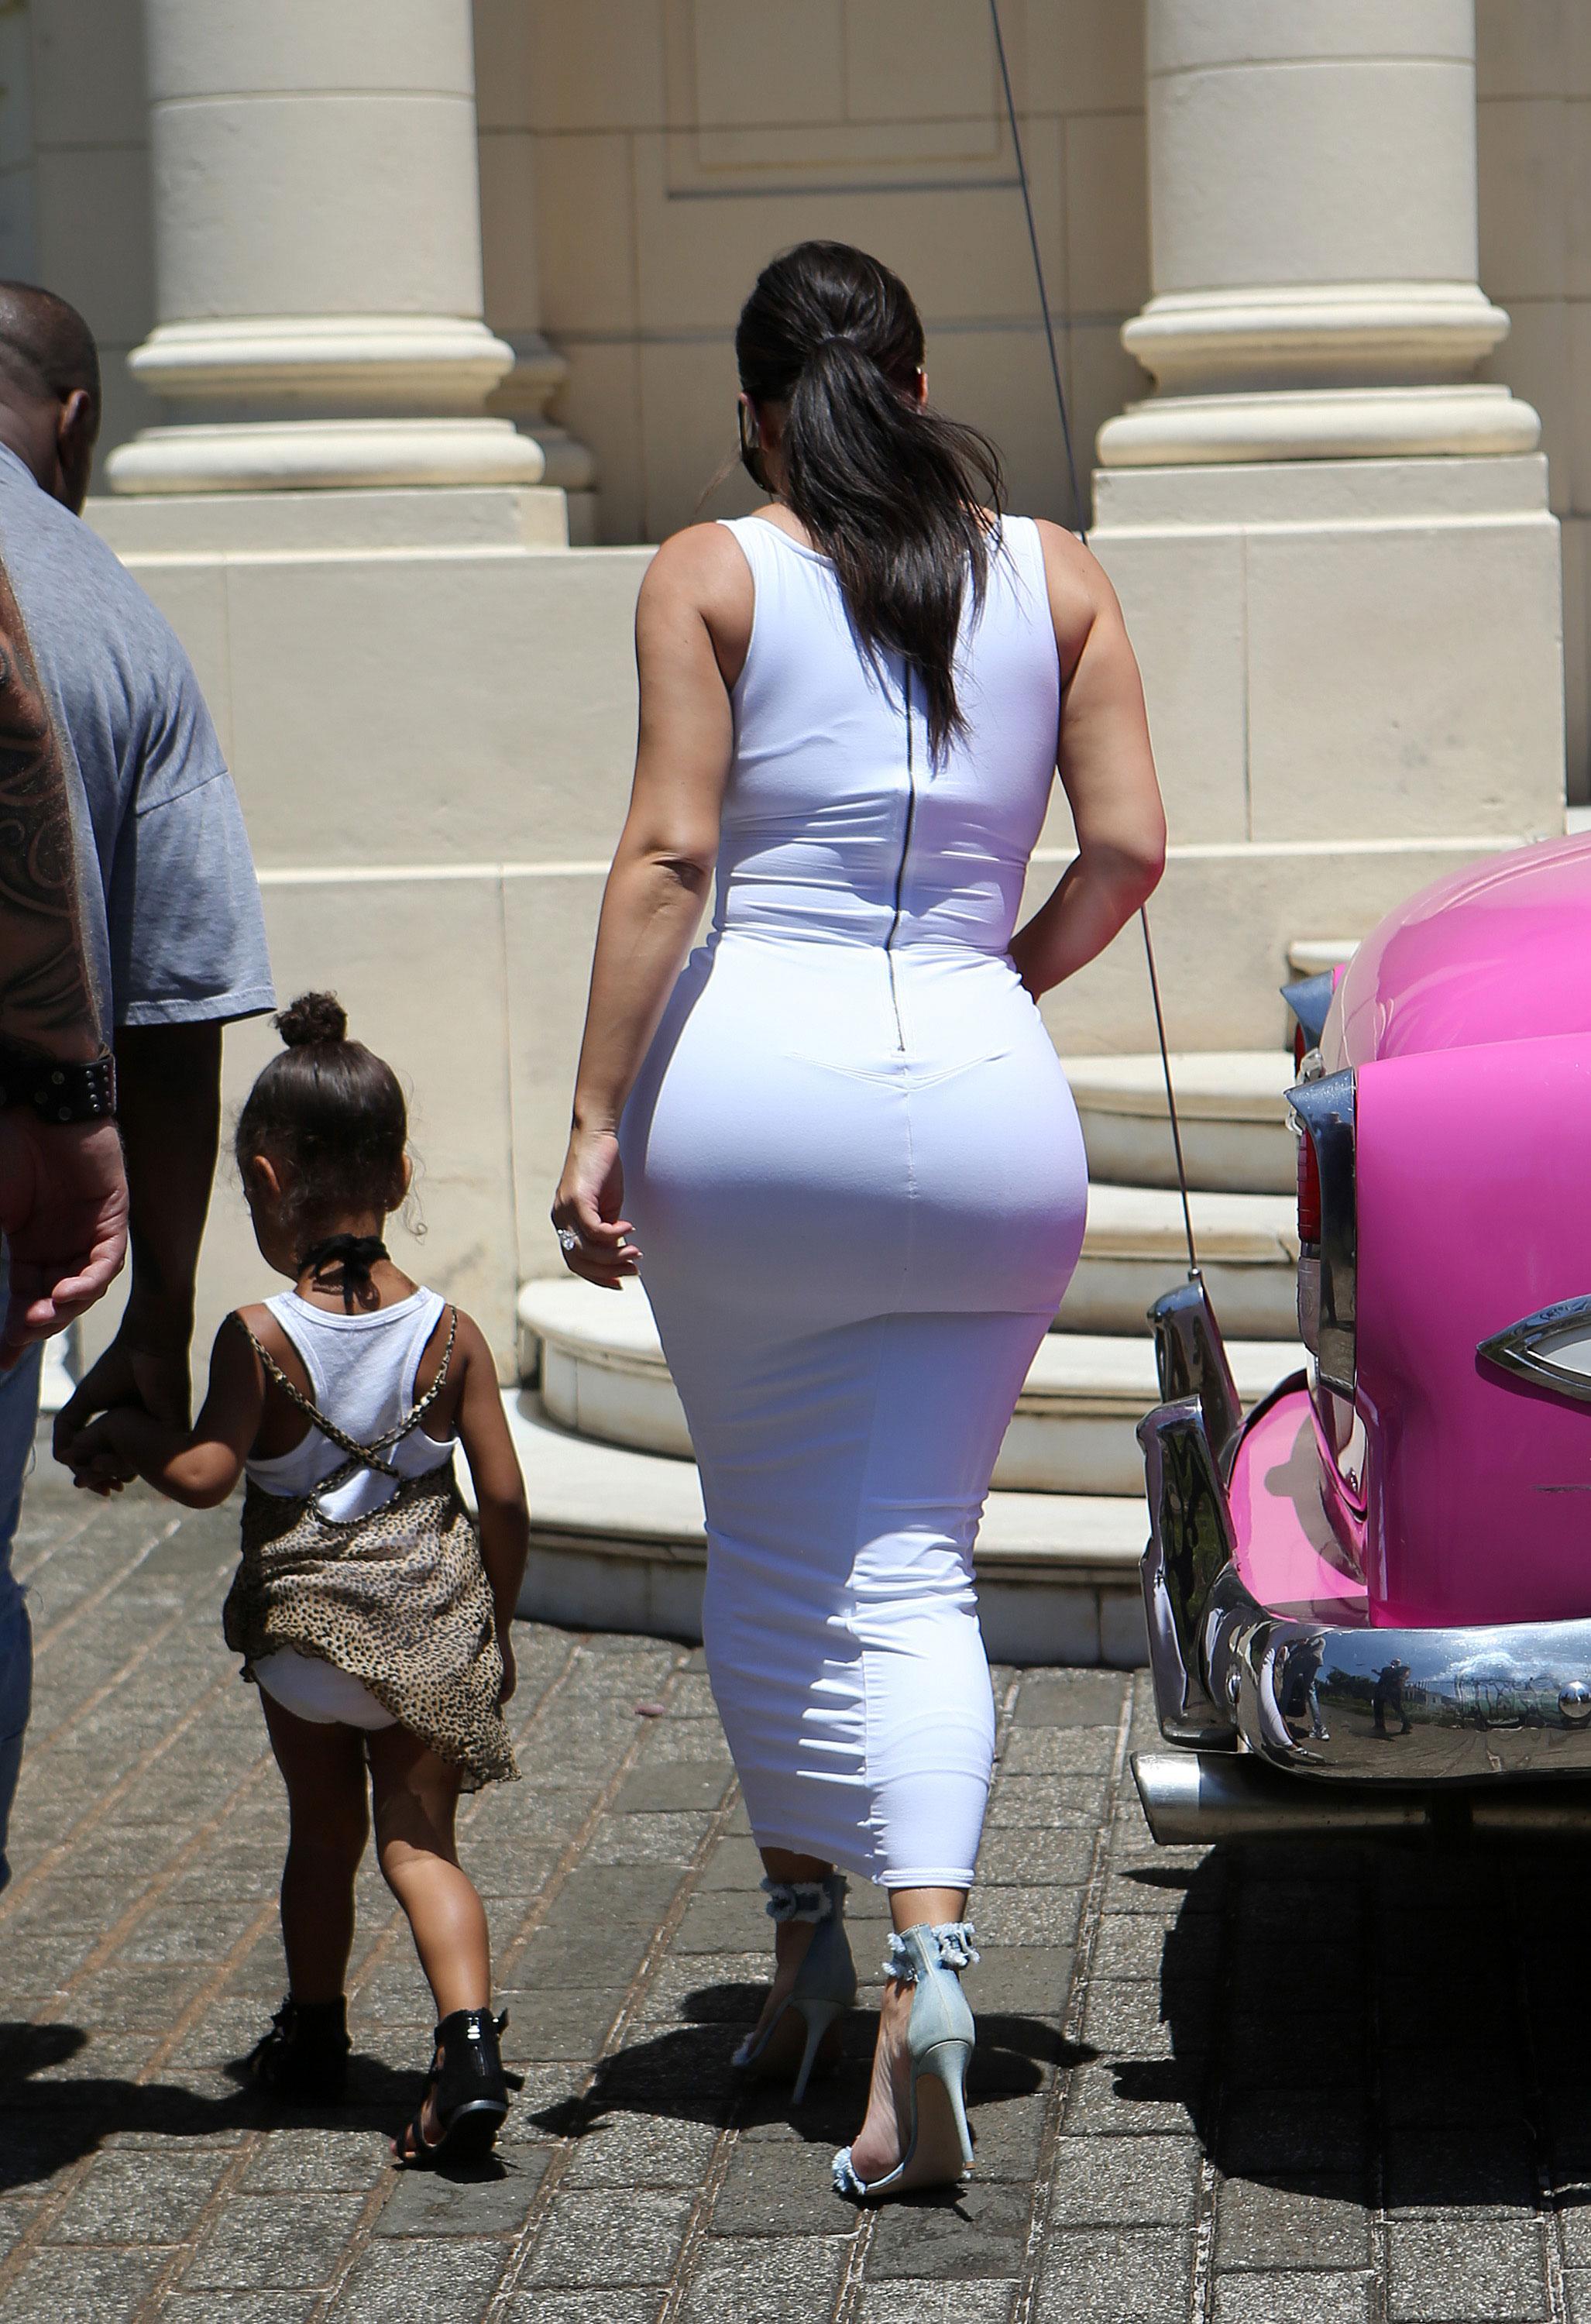 Hot ass waking Bootylicious Kim Kardashian Exposes Larger Than Ever Butt In Sexy Skintight White Dress